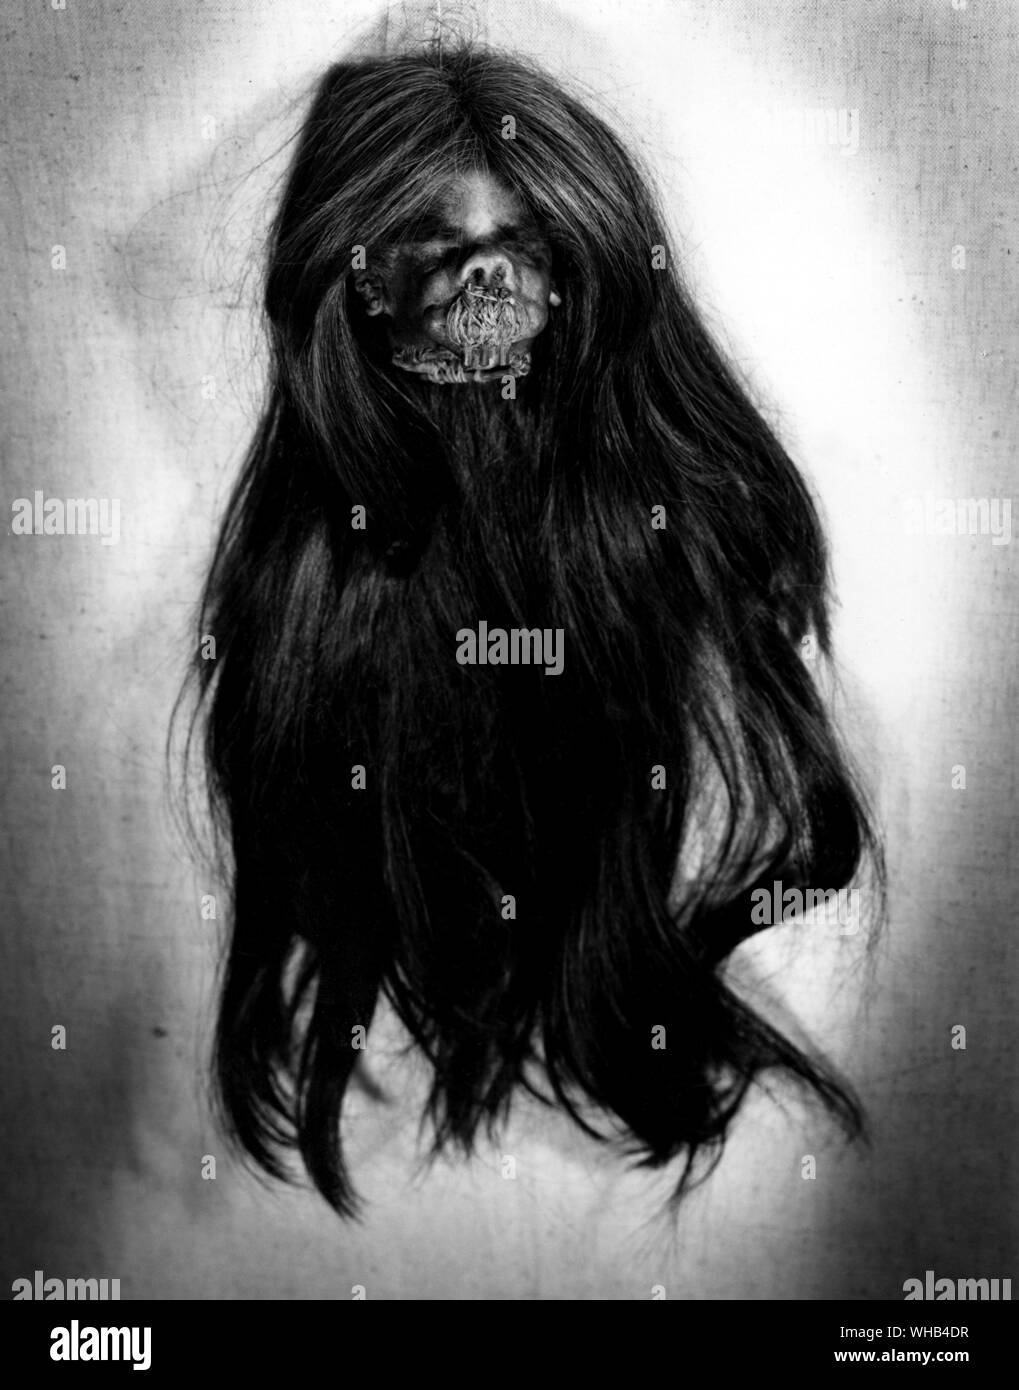 Human Shrunken Head Black And White Stock Photos And Images Alamy